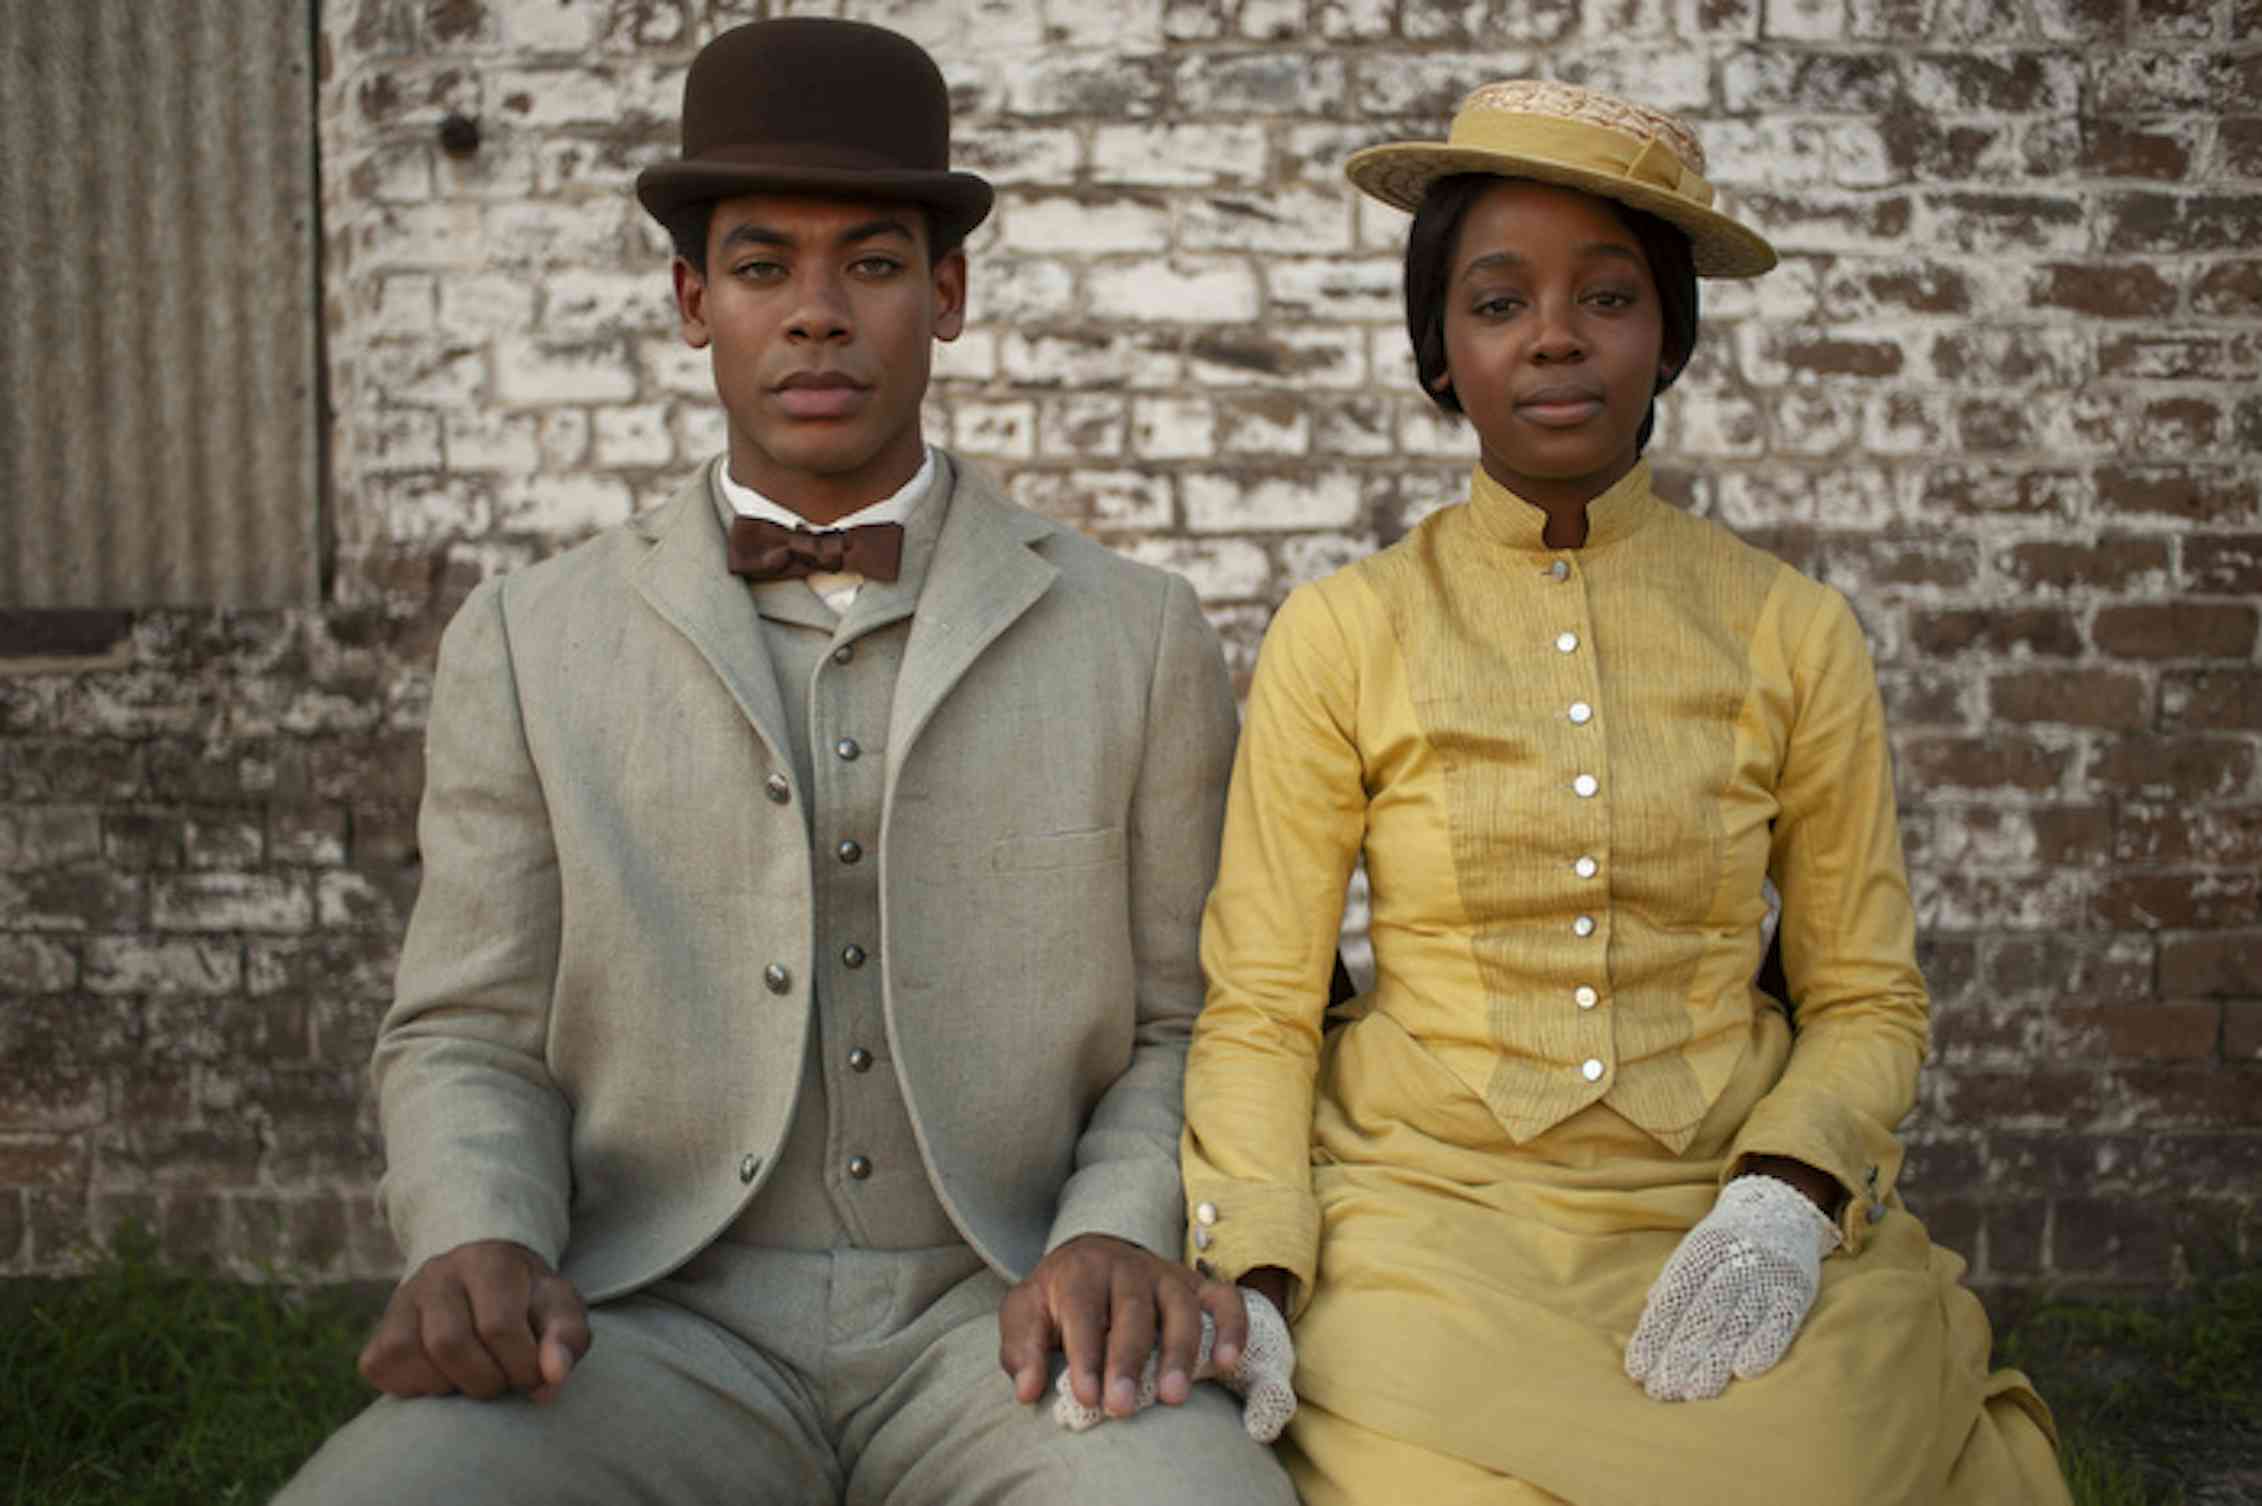 ‘The Underground Railroad’ Attempts To Upend Viewers’ Notions Of What It Meant To Be Enslaved